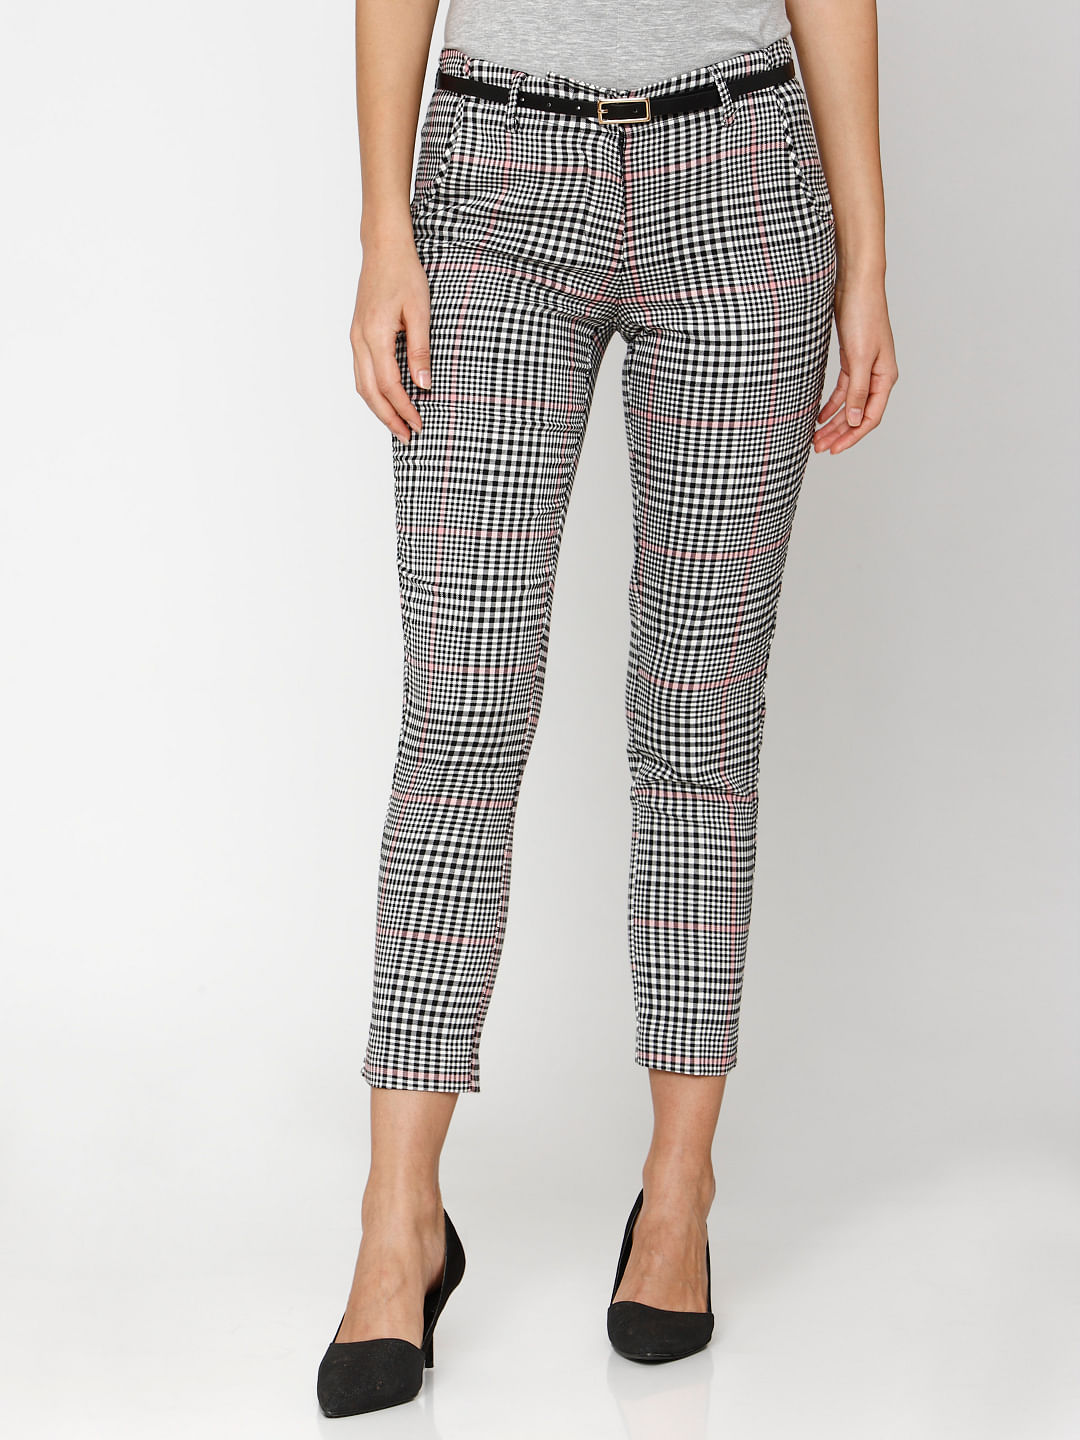 Mid Rise Plaid Skinny Ankle Pants in Bi-Stretch | Gap Factory